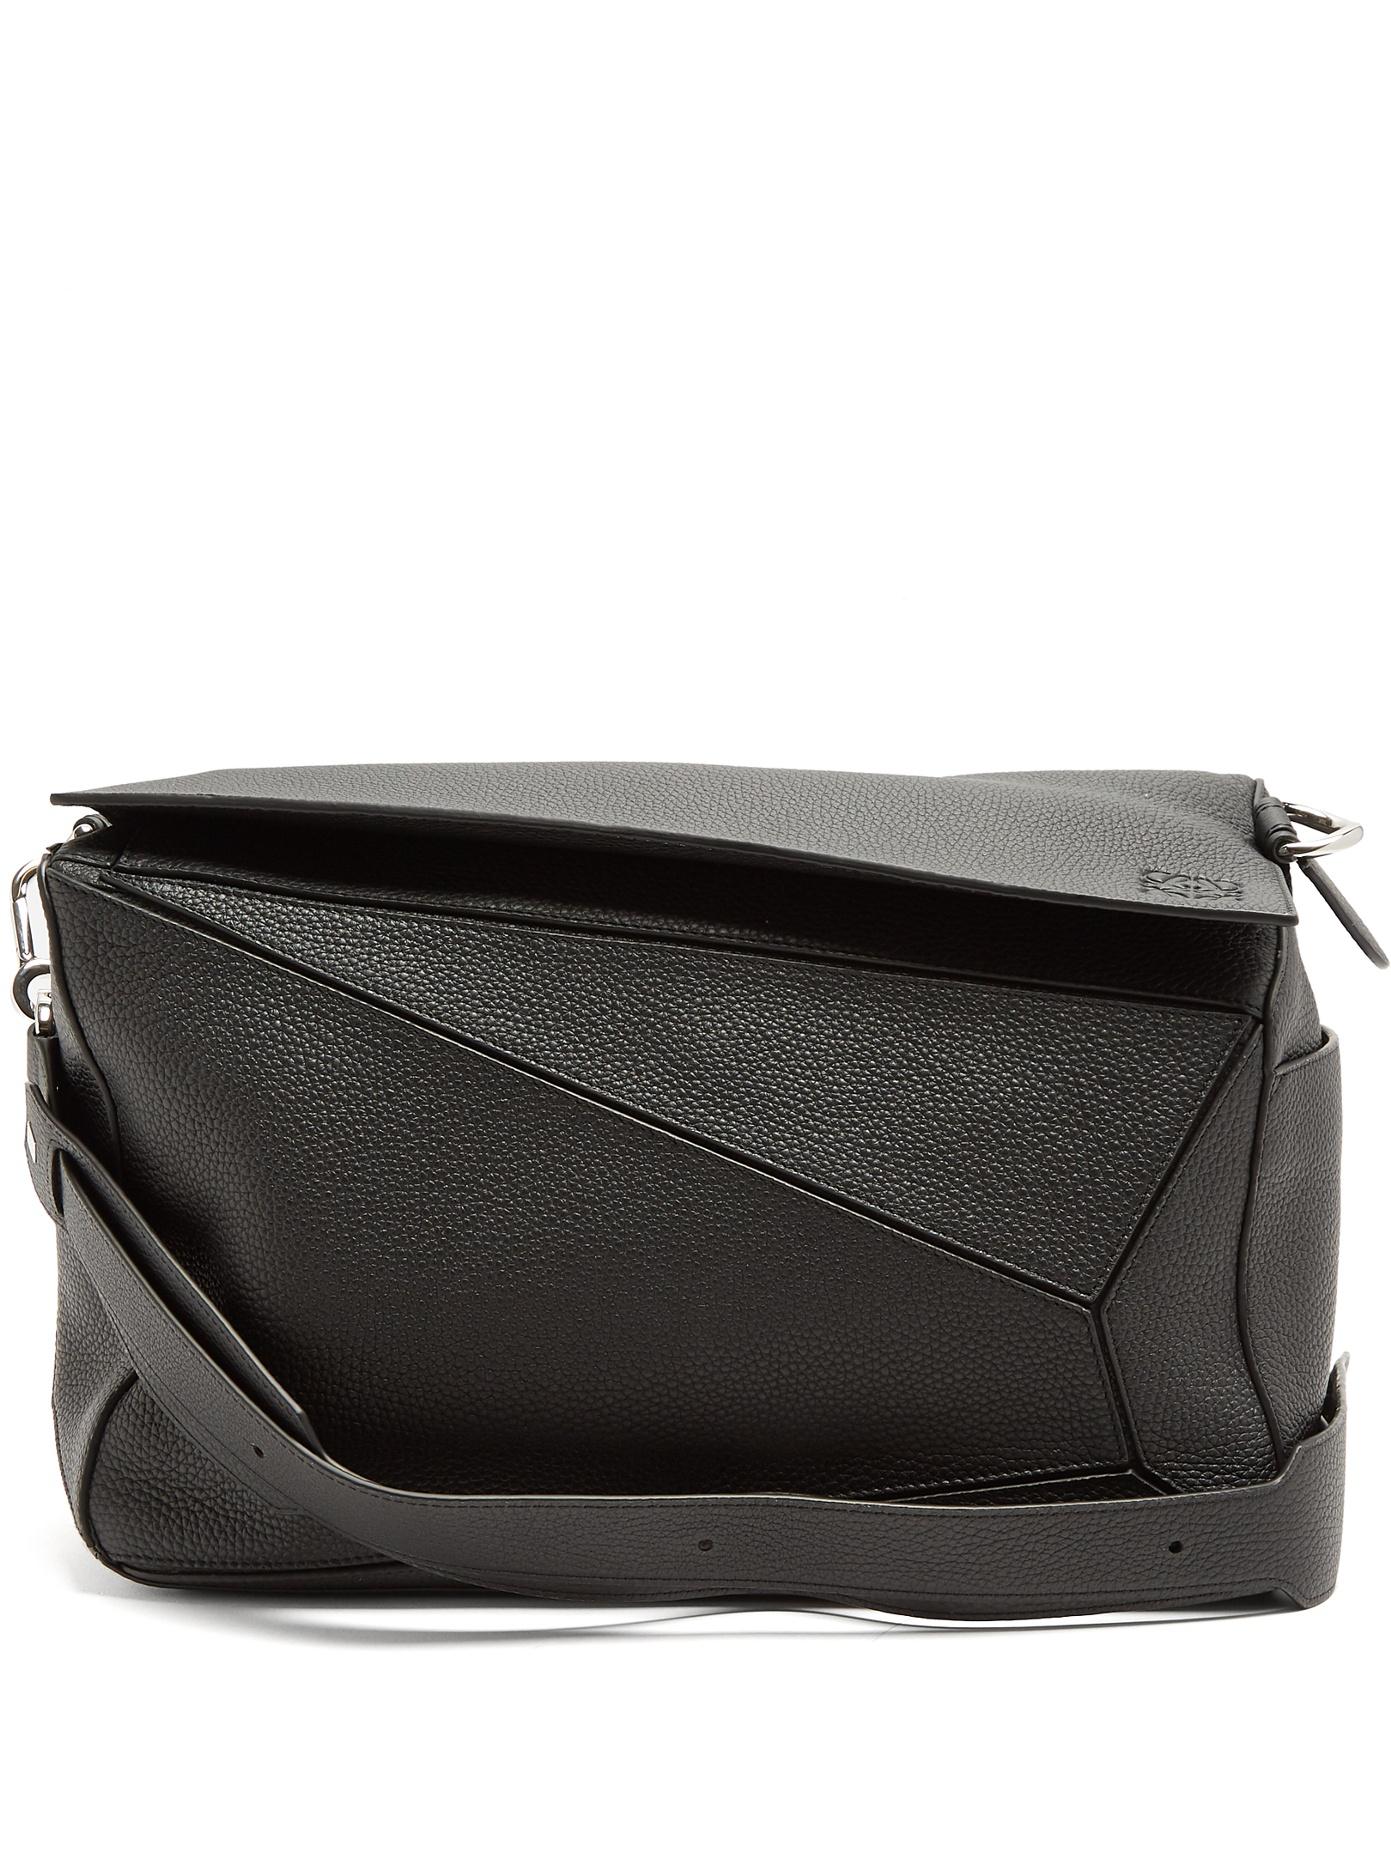 Lyst - Loewe Puzzle Large Leather Bag in Black for Men